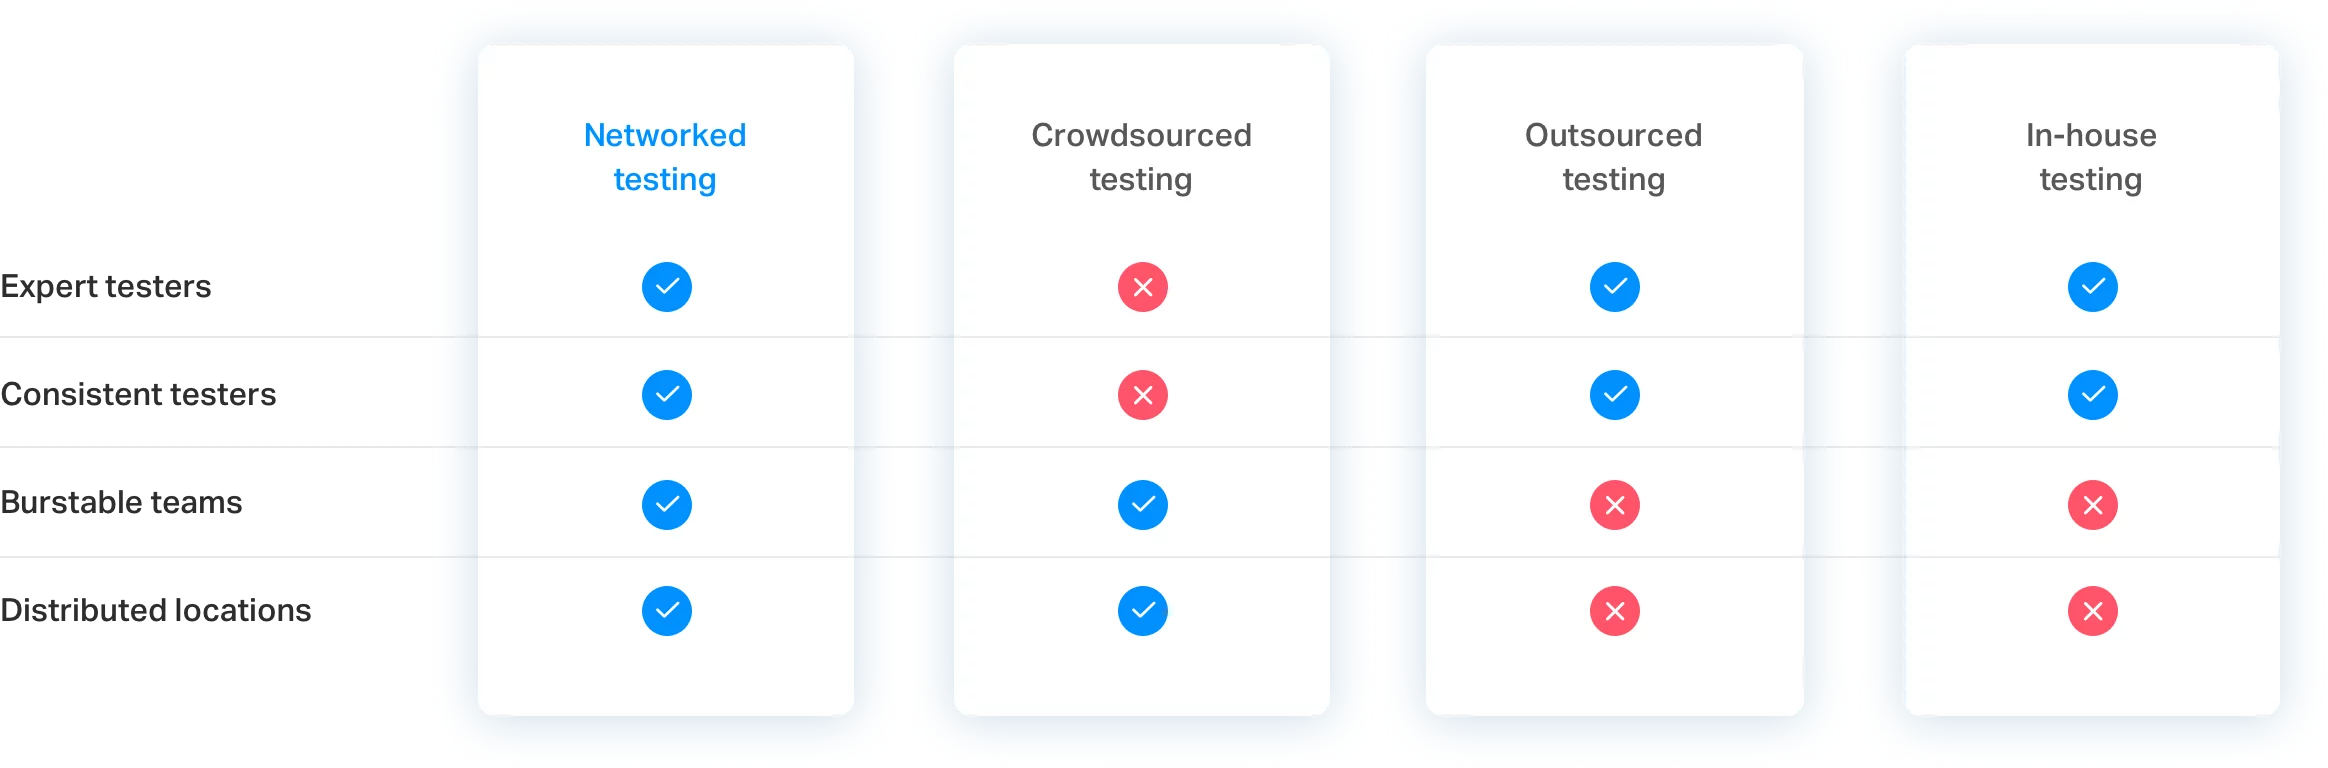 Networked testing vs. crowdsourced testing vs. outsourced testing vs. in-house testing